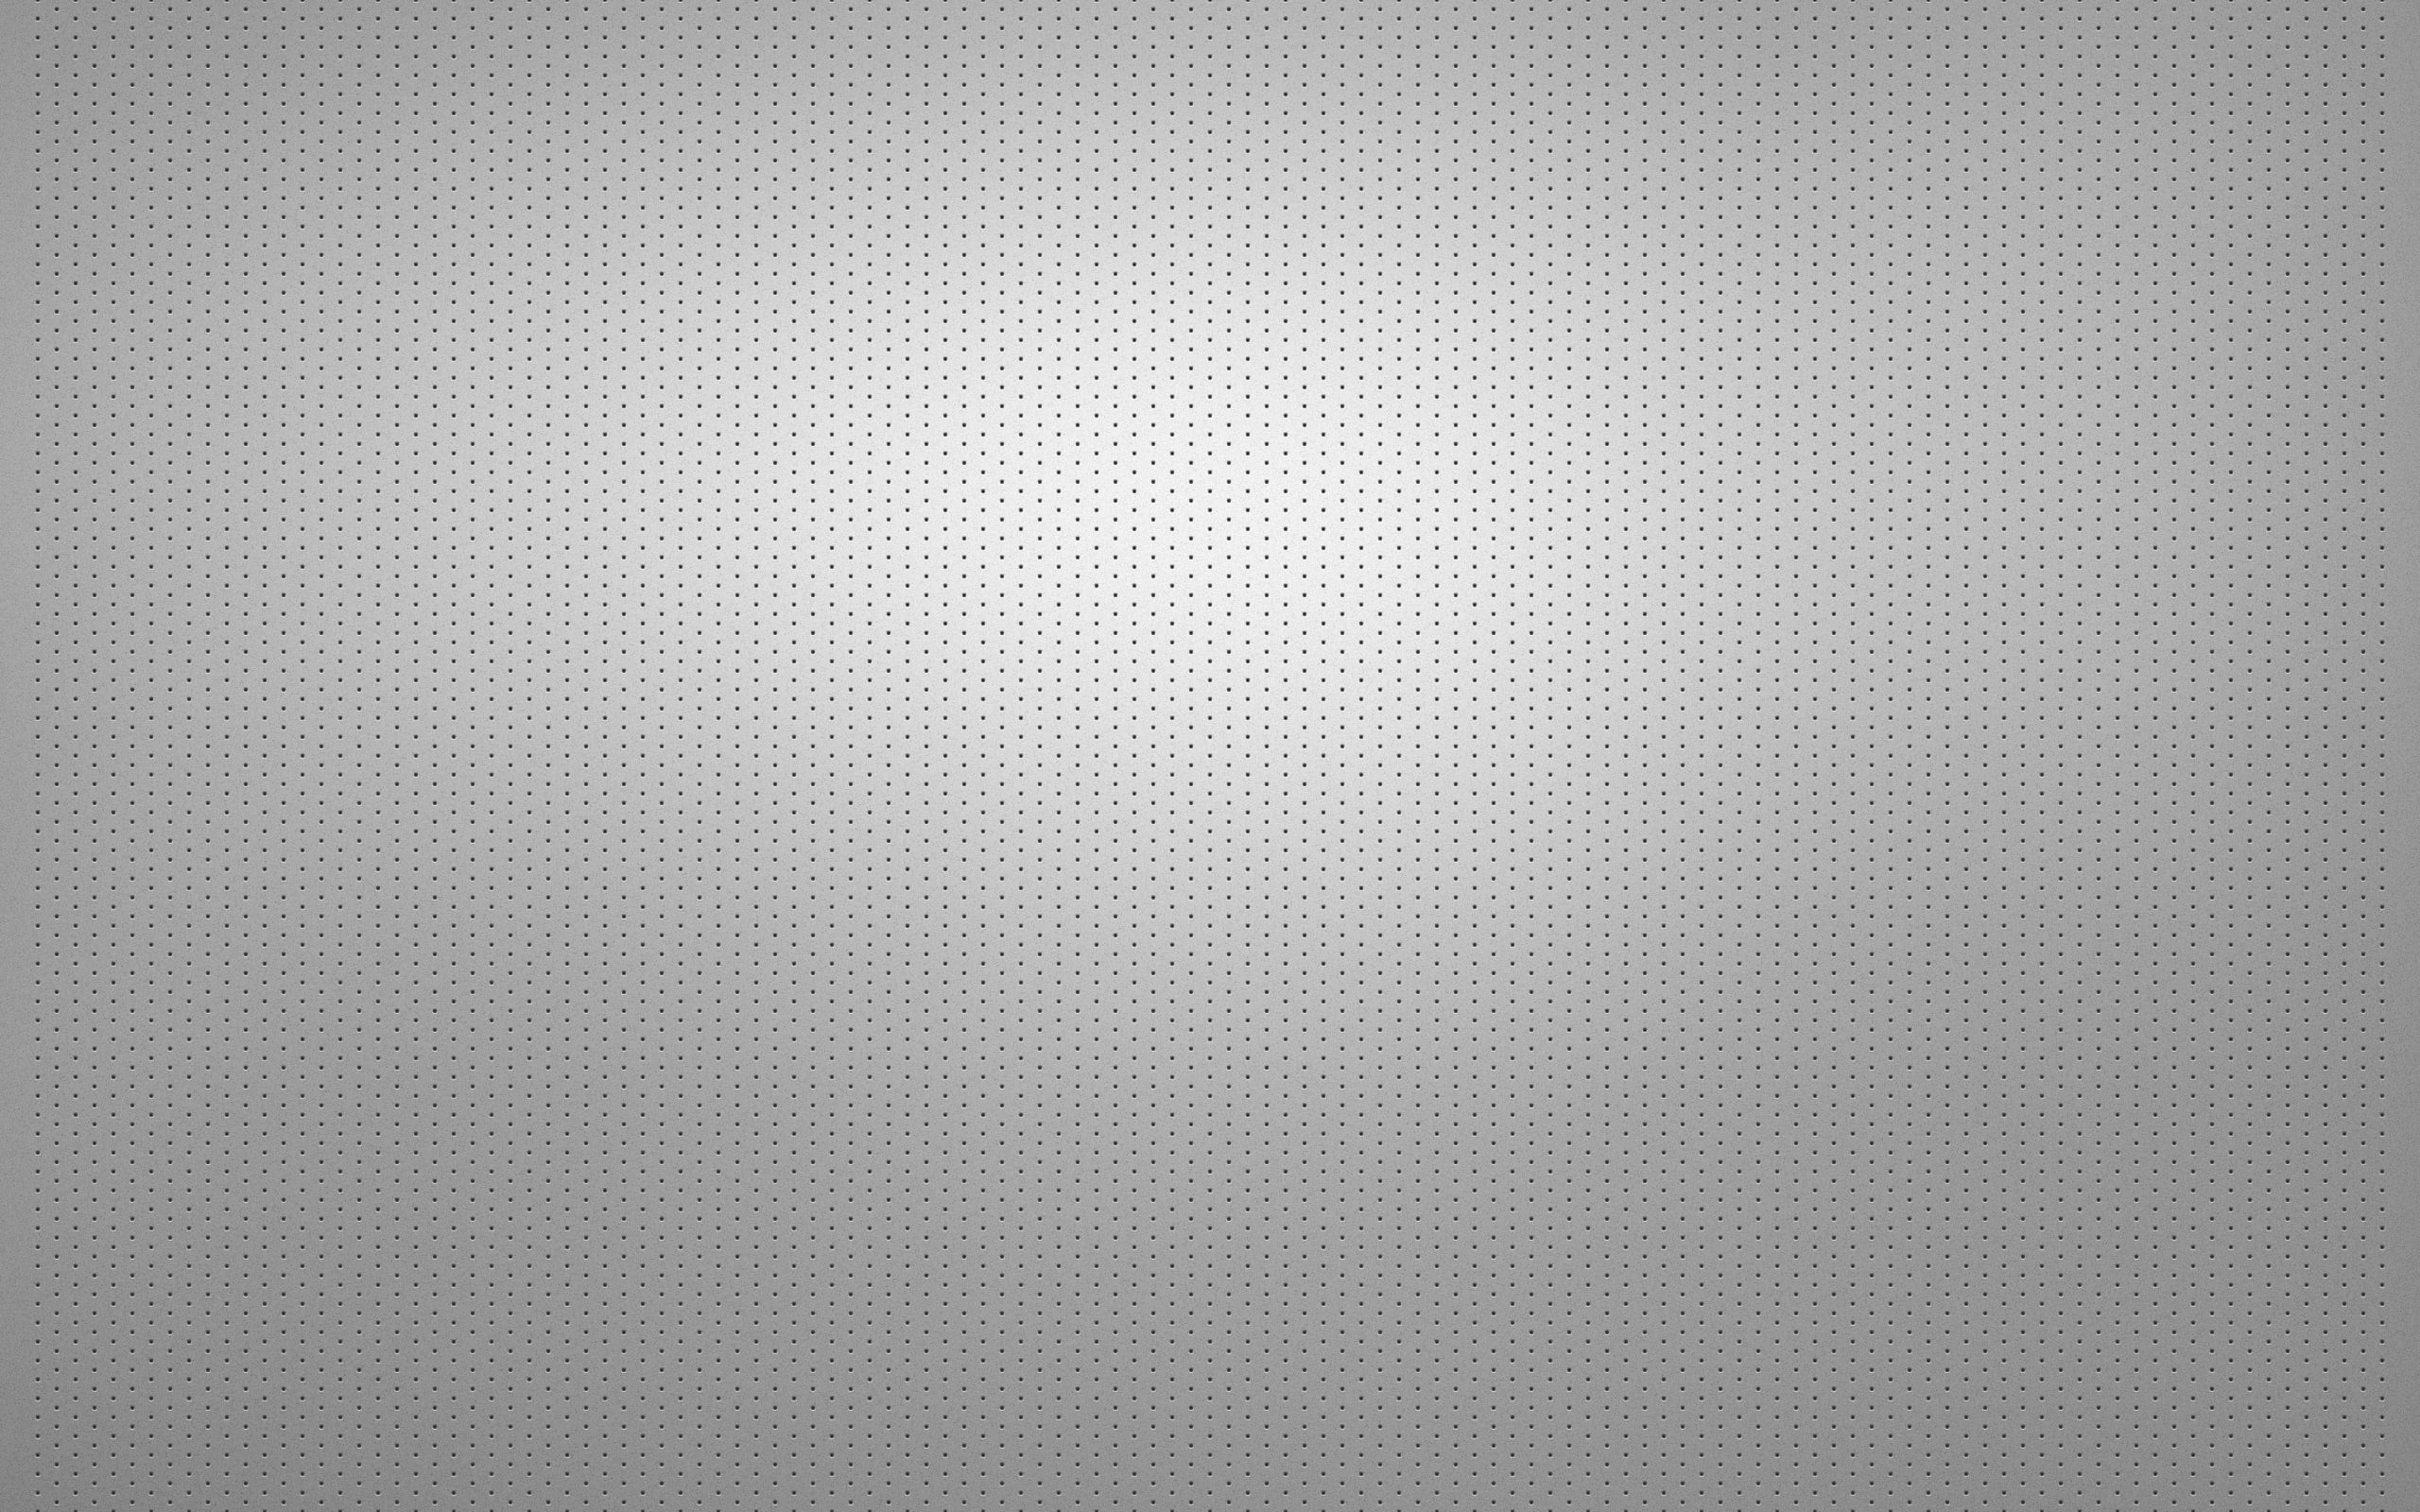 mesh, points, background, silver, backgrounds, pattern, metallic